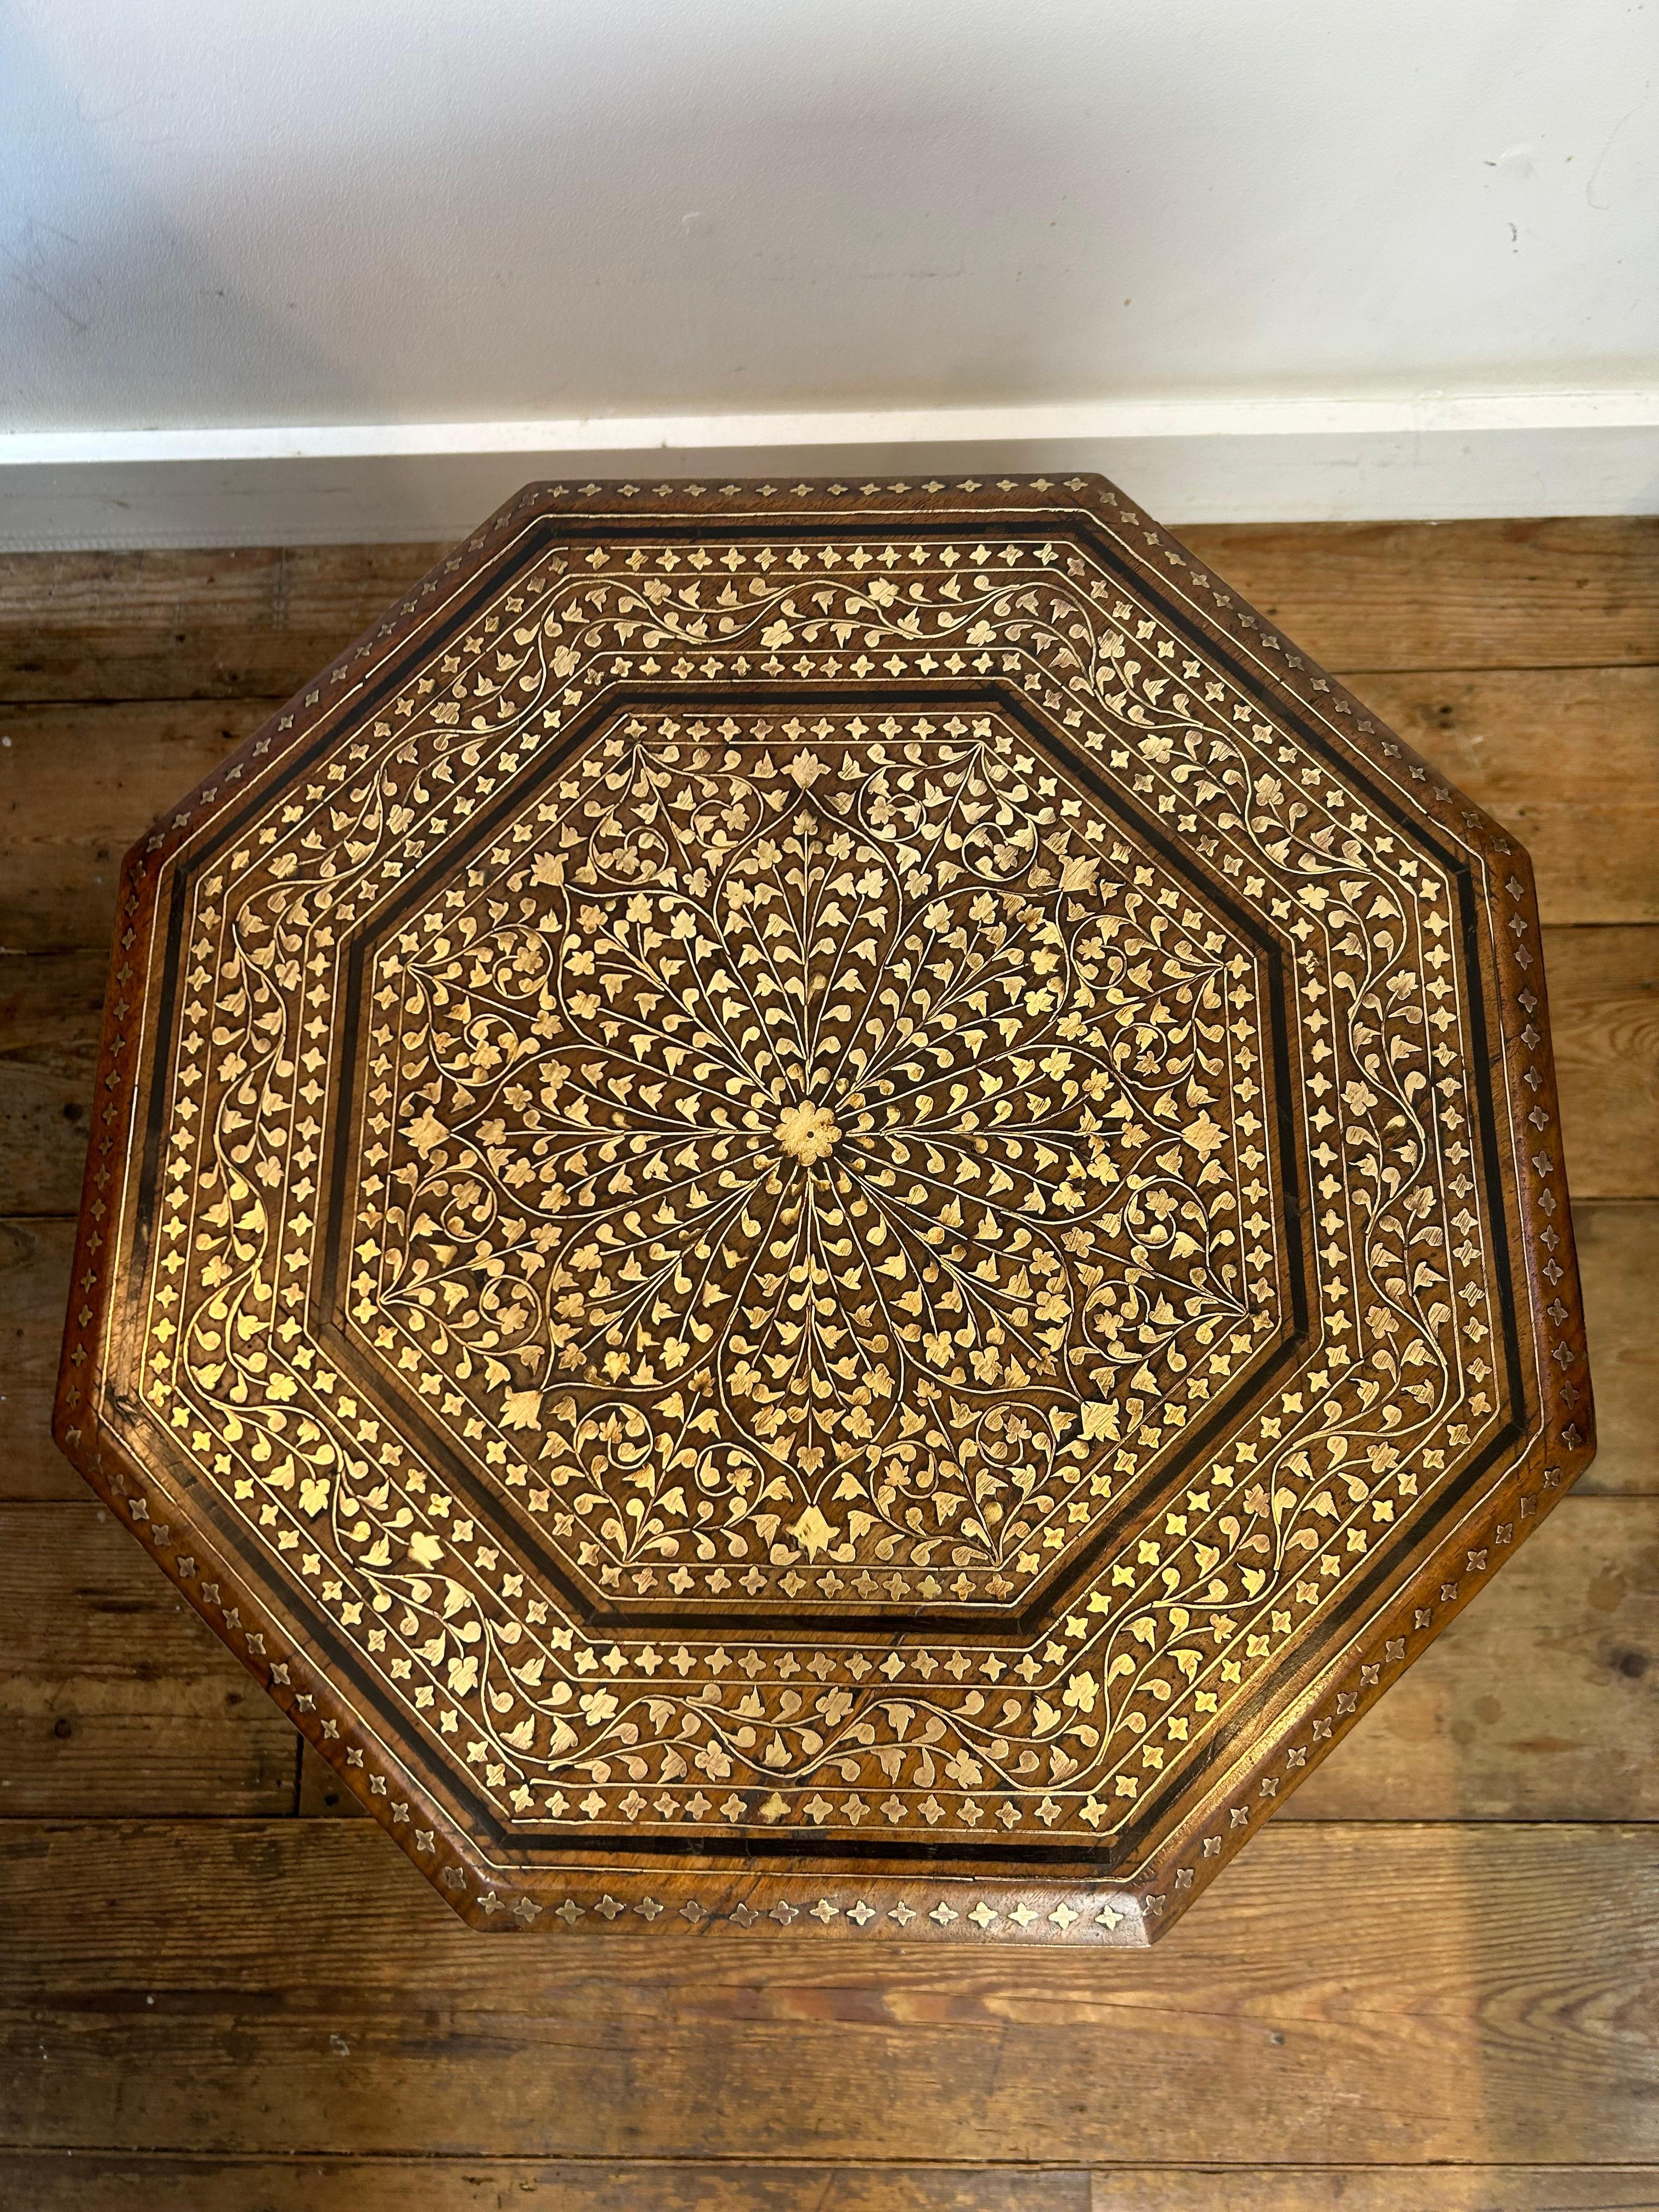 Hoshiarpur hexagonal table circa 1890 profusely inlayed with brass foliage and barbers pole decoration to the legs, the table is in very good condition with no missing inlays and a pleasing light colour.